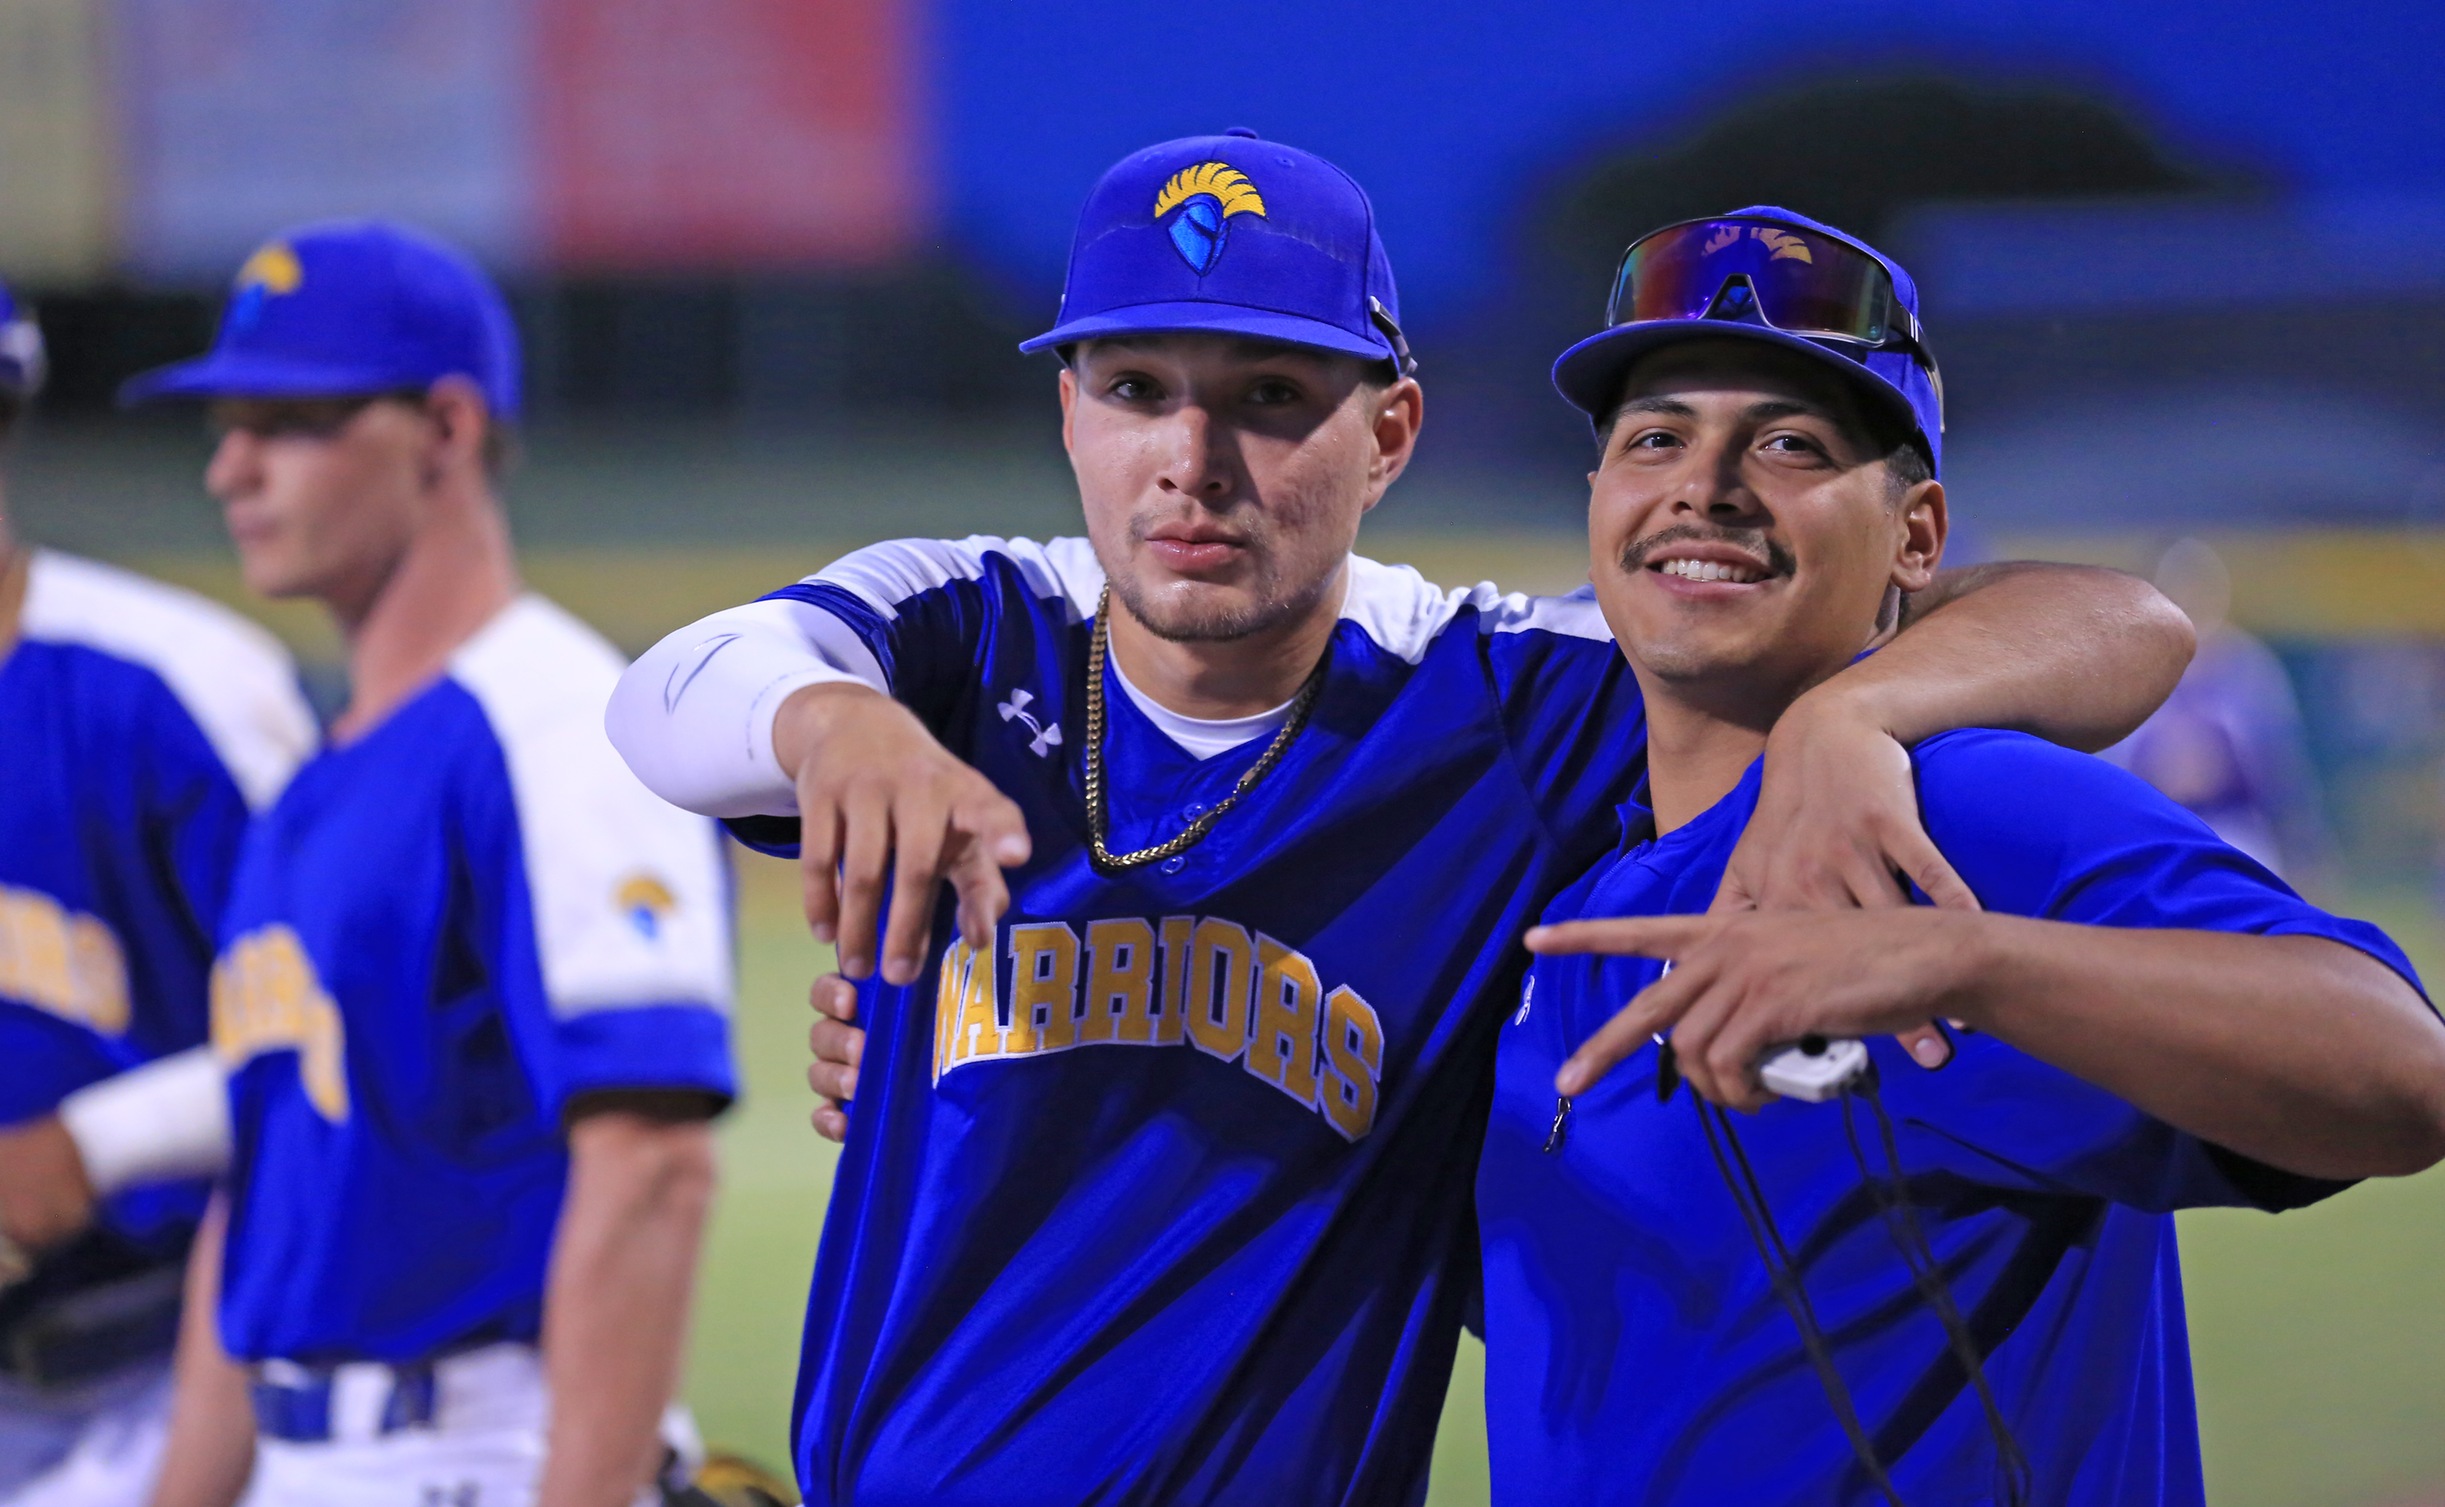 Ray Moore Jr. and Eddie Rios pose for a shot before the start of the Warriors 7-6 win over ERAU at the Cal Pac playoffs in Mesa, Arizona. Photo by Brandon Petersen.